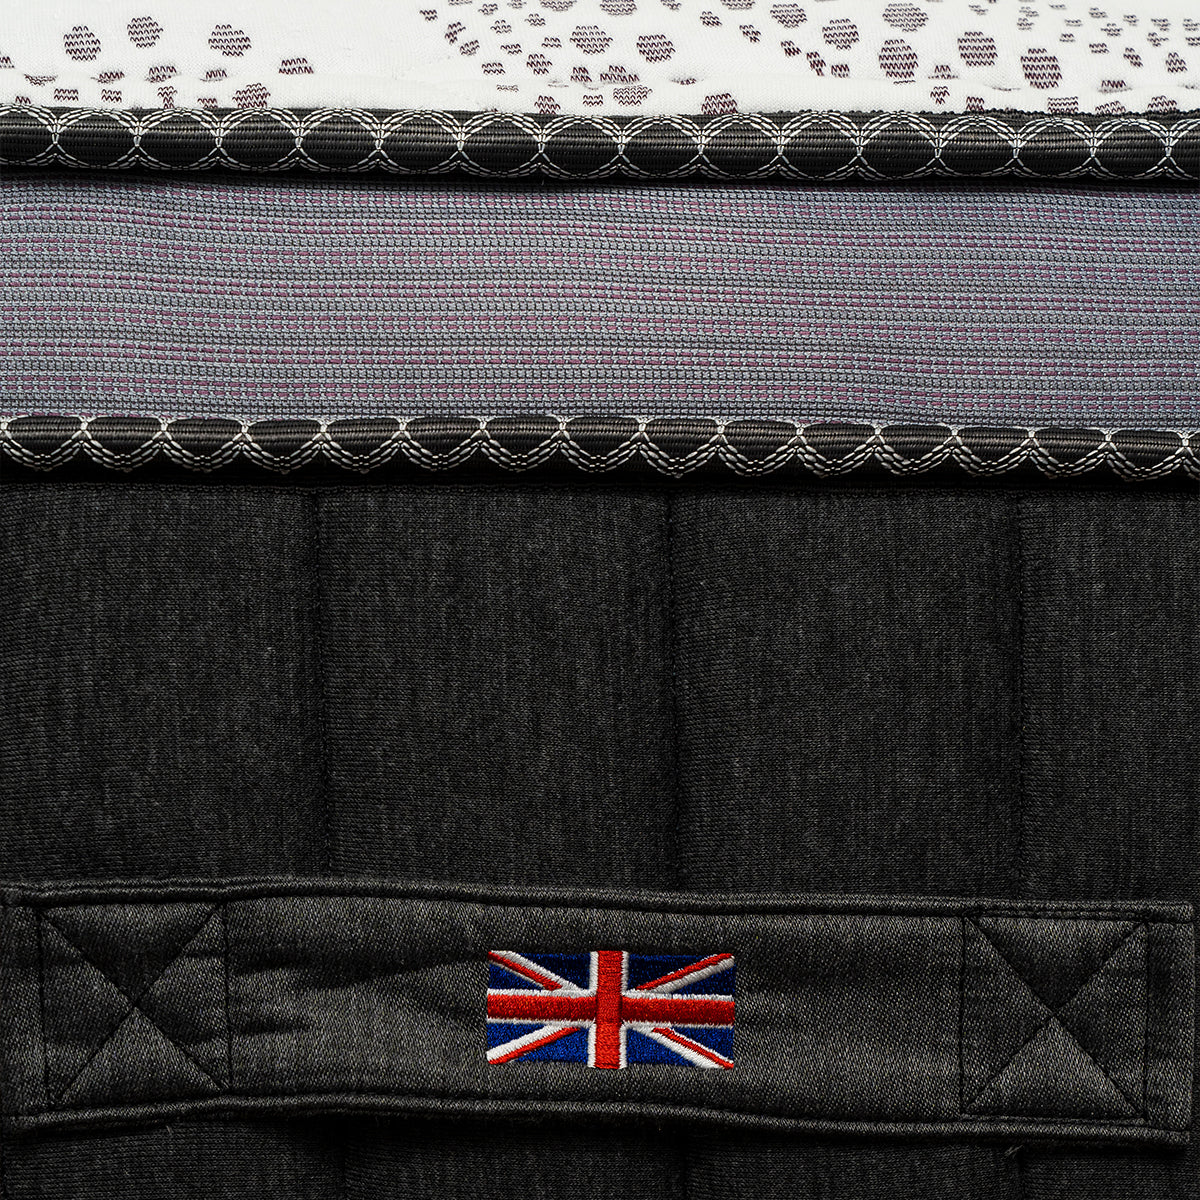 Spink & Co Leeds Luxury Firm mattress side view closeup of stitched carrying handles with Union Jack flag and cover fabric